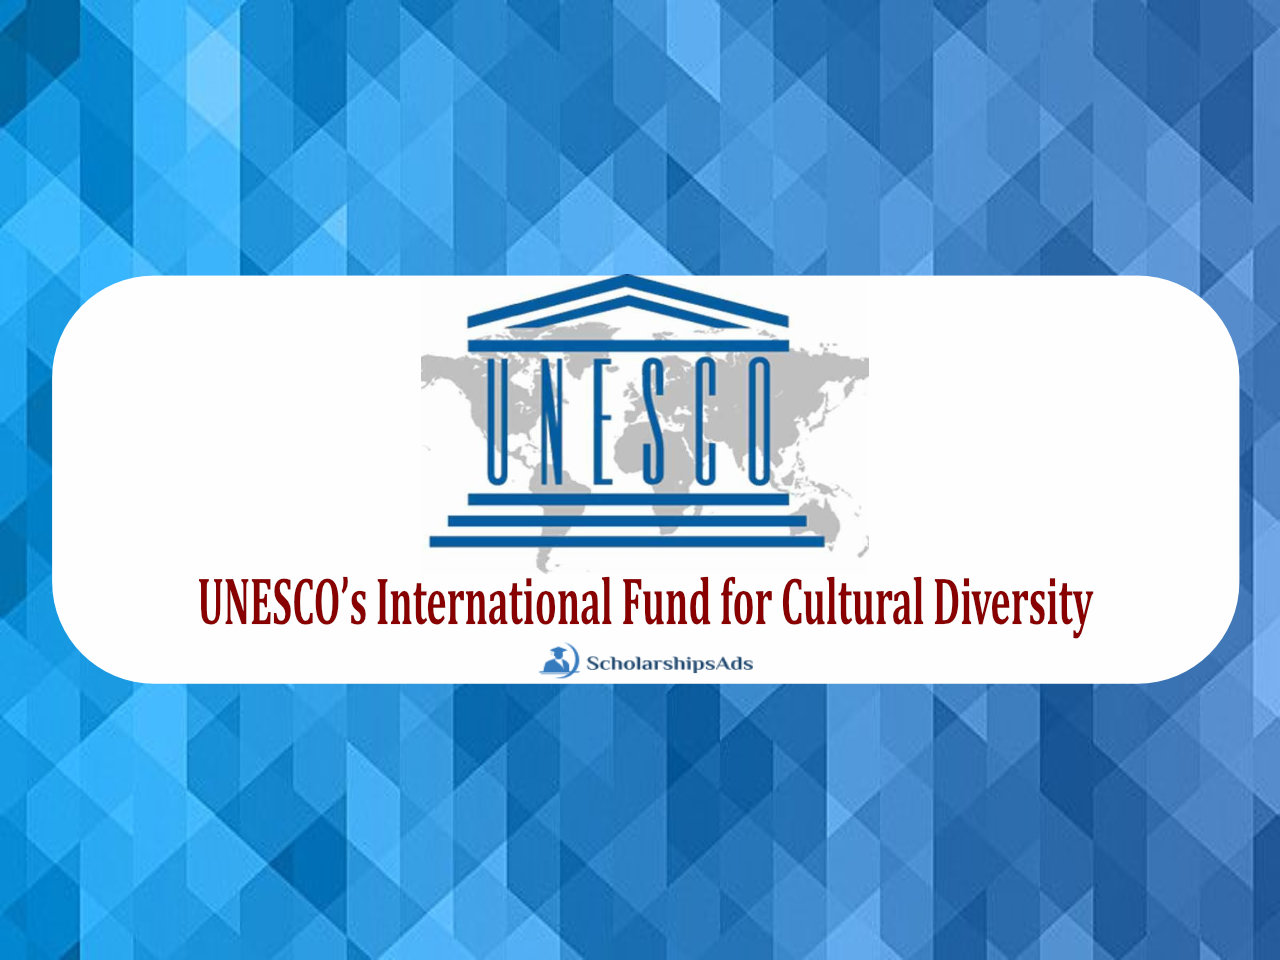 UNESCO’s International Fund for Cultural Diversity